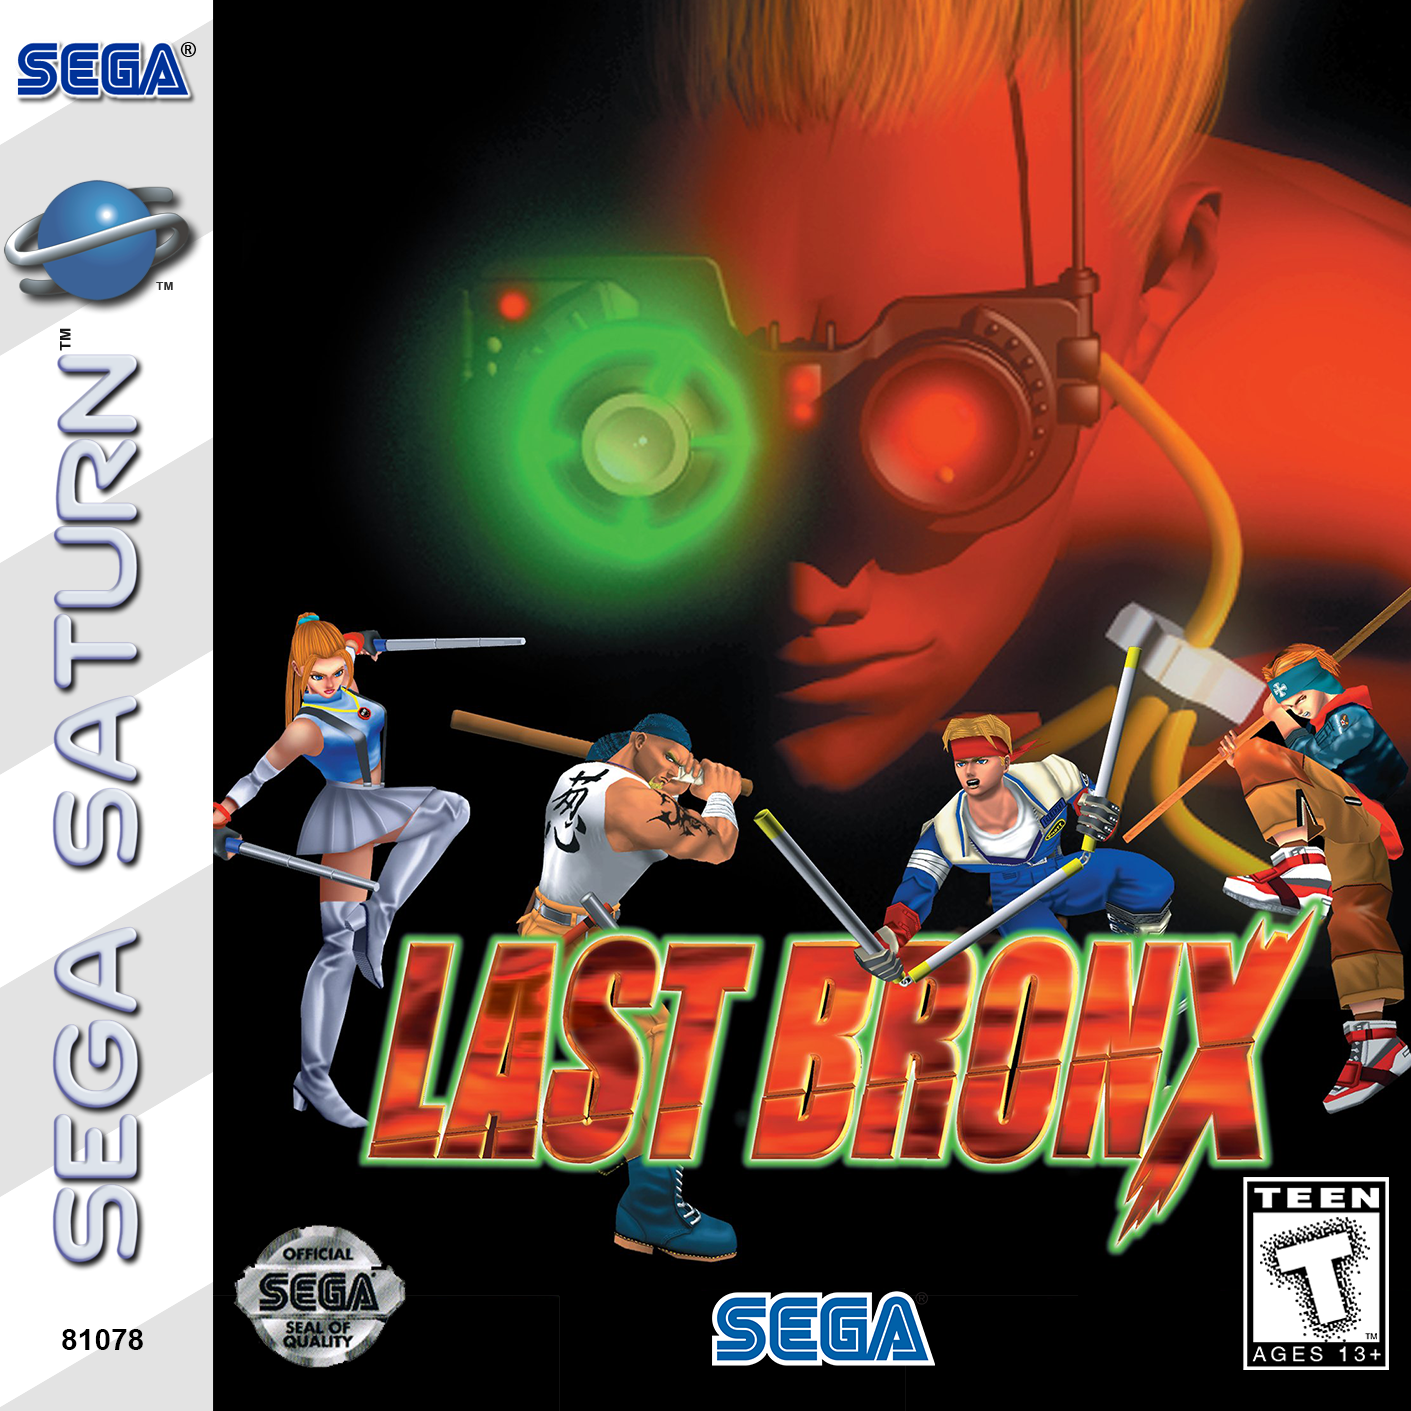 Last Bronx Cover.png